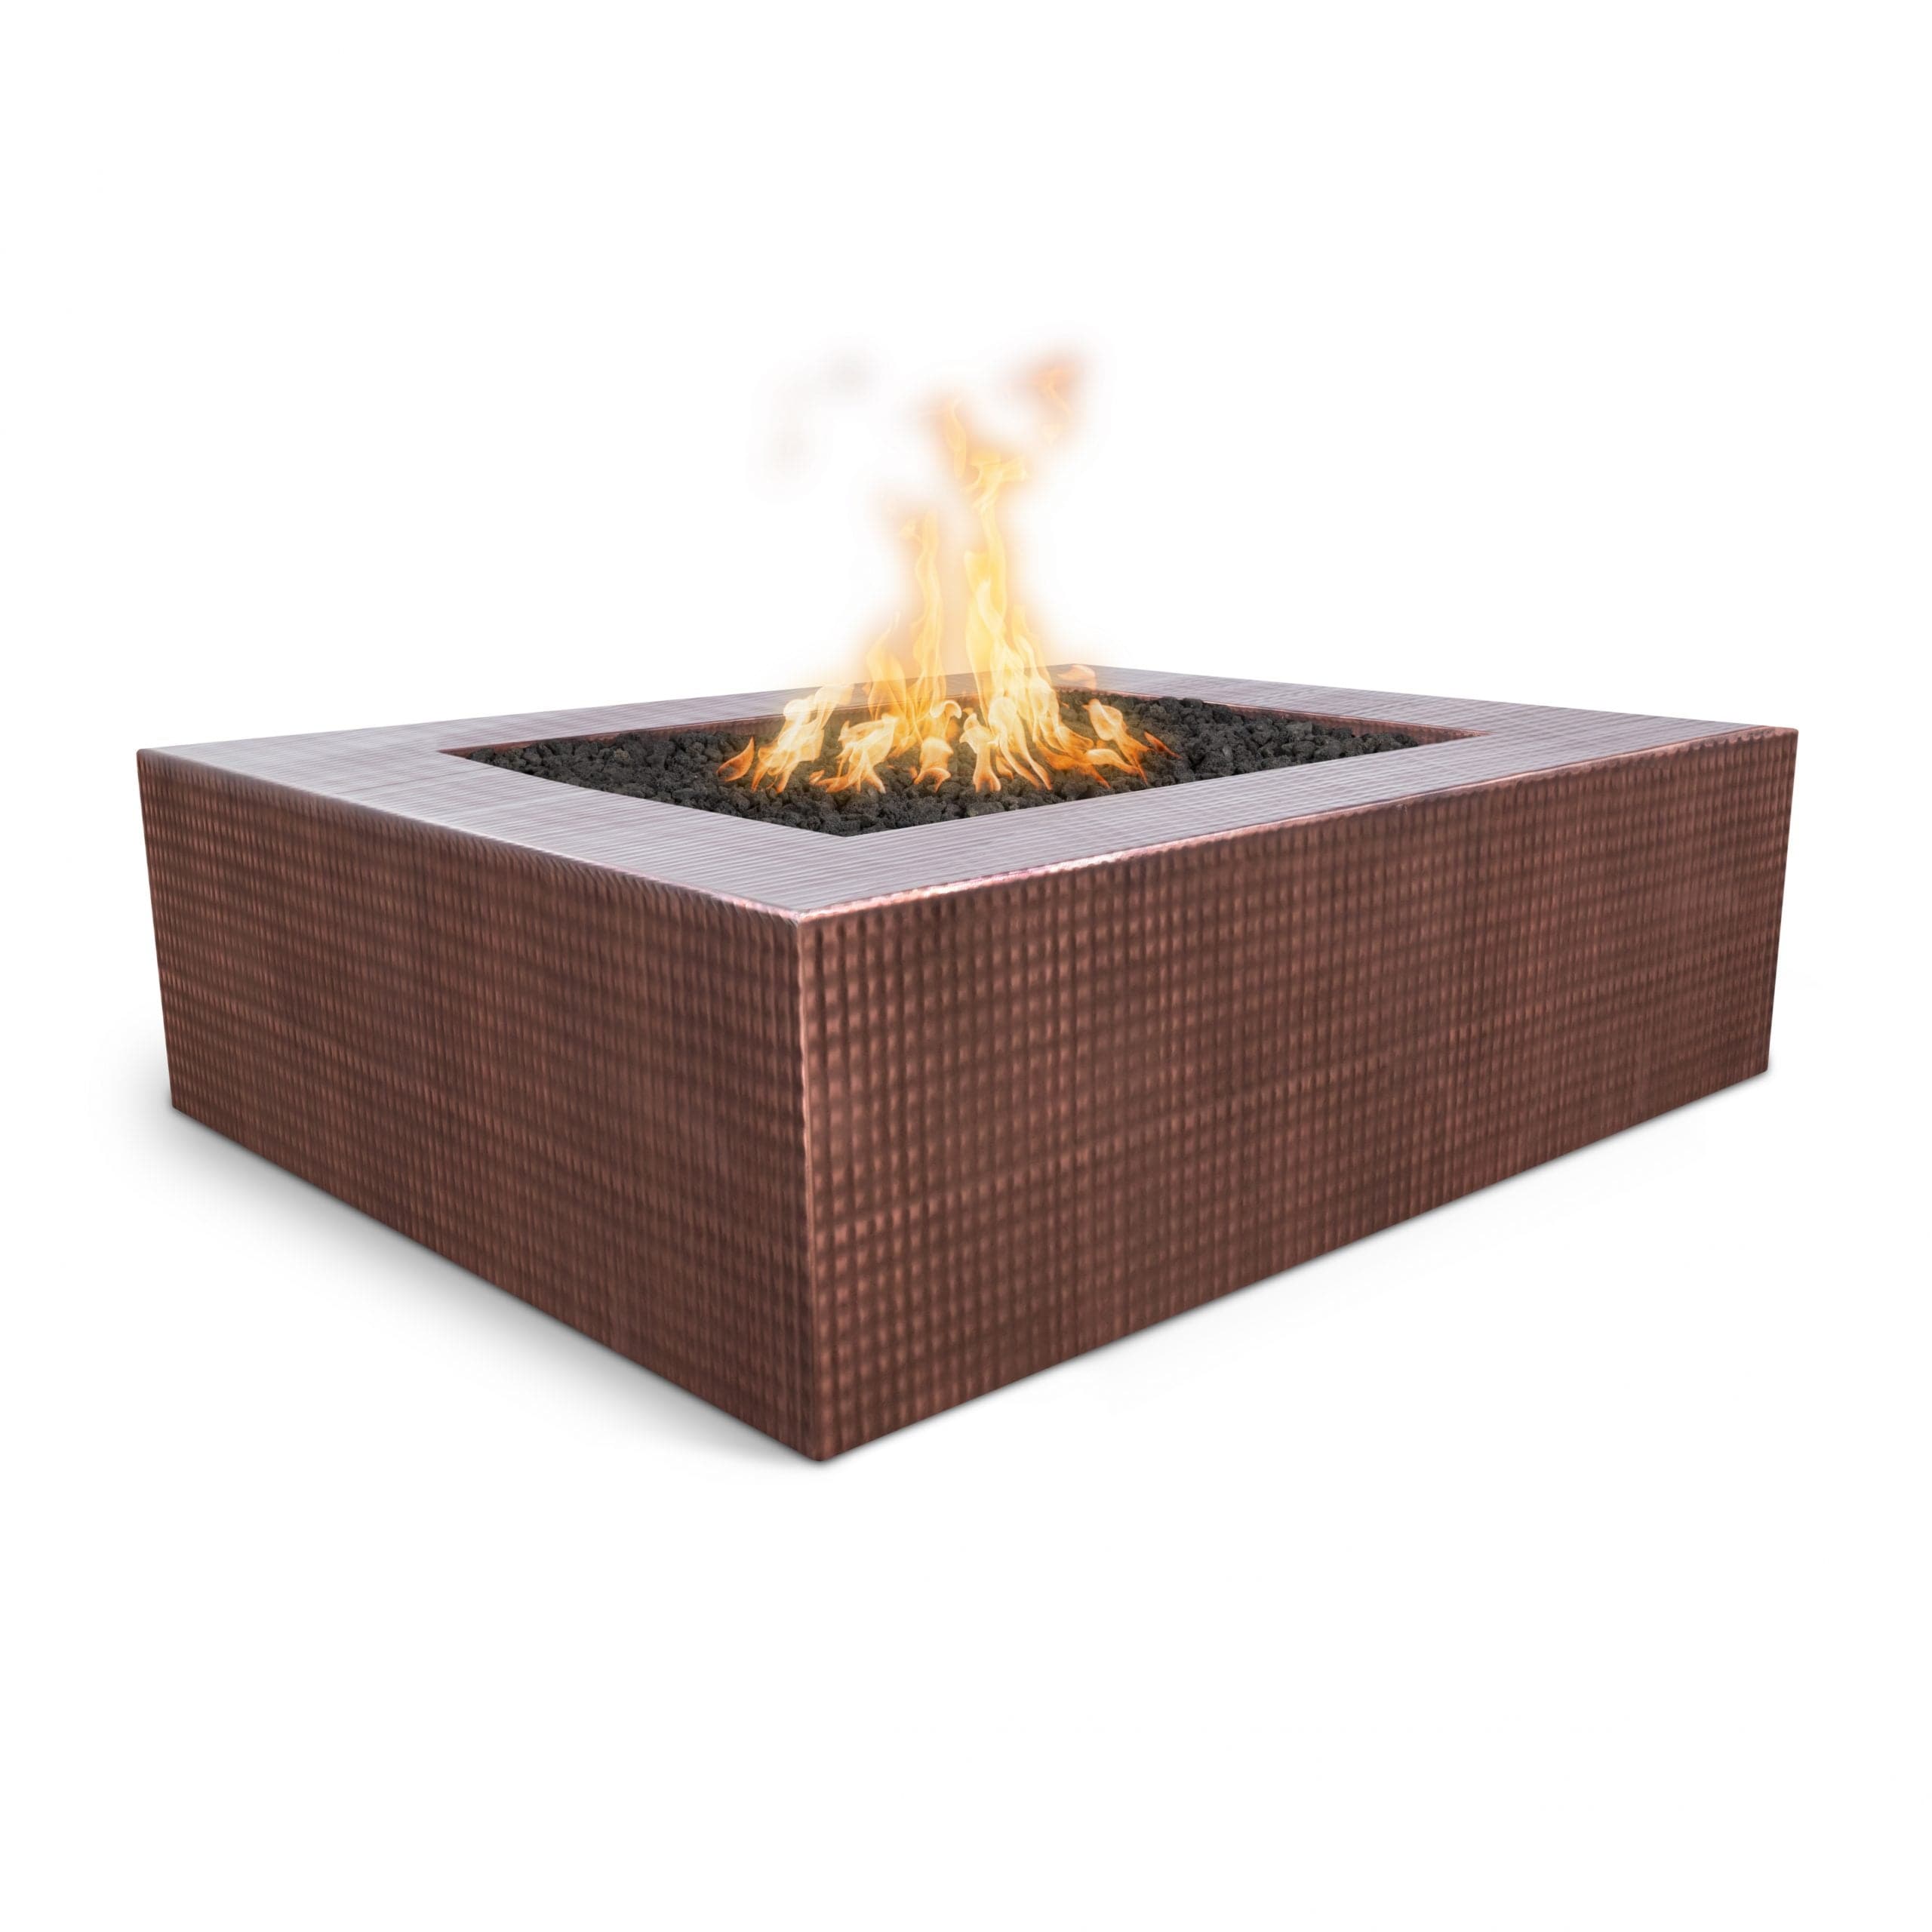 The Outdoor Plus Fire Pit Hammered Patina Copper / 36